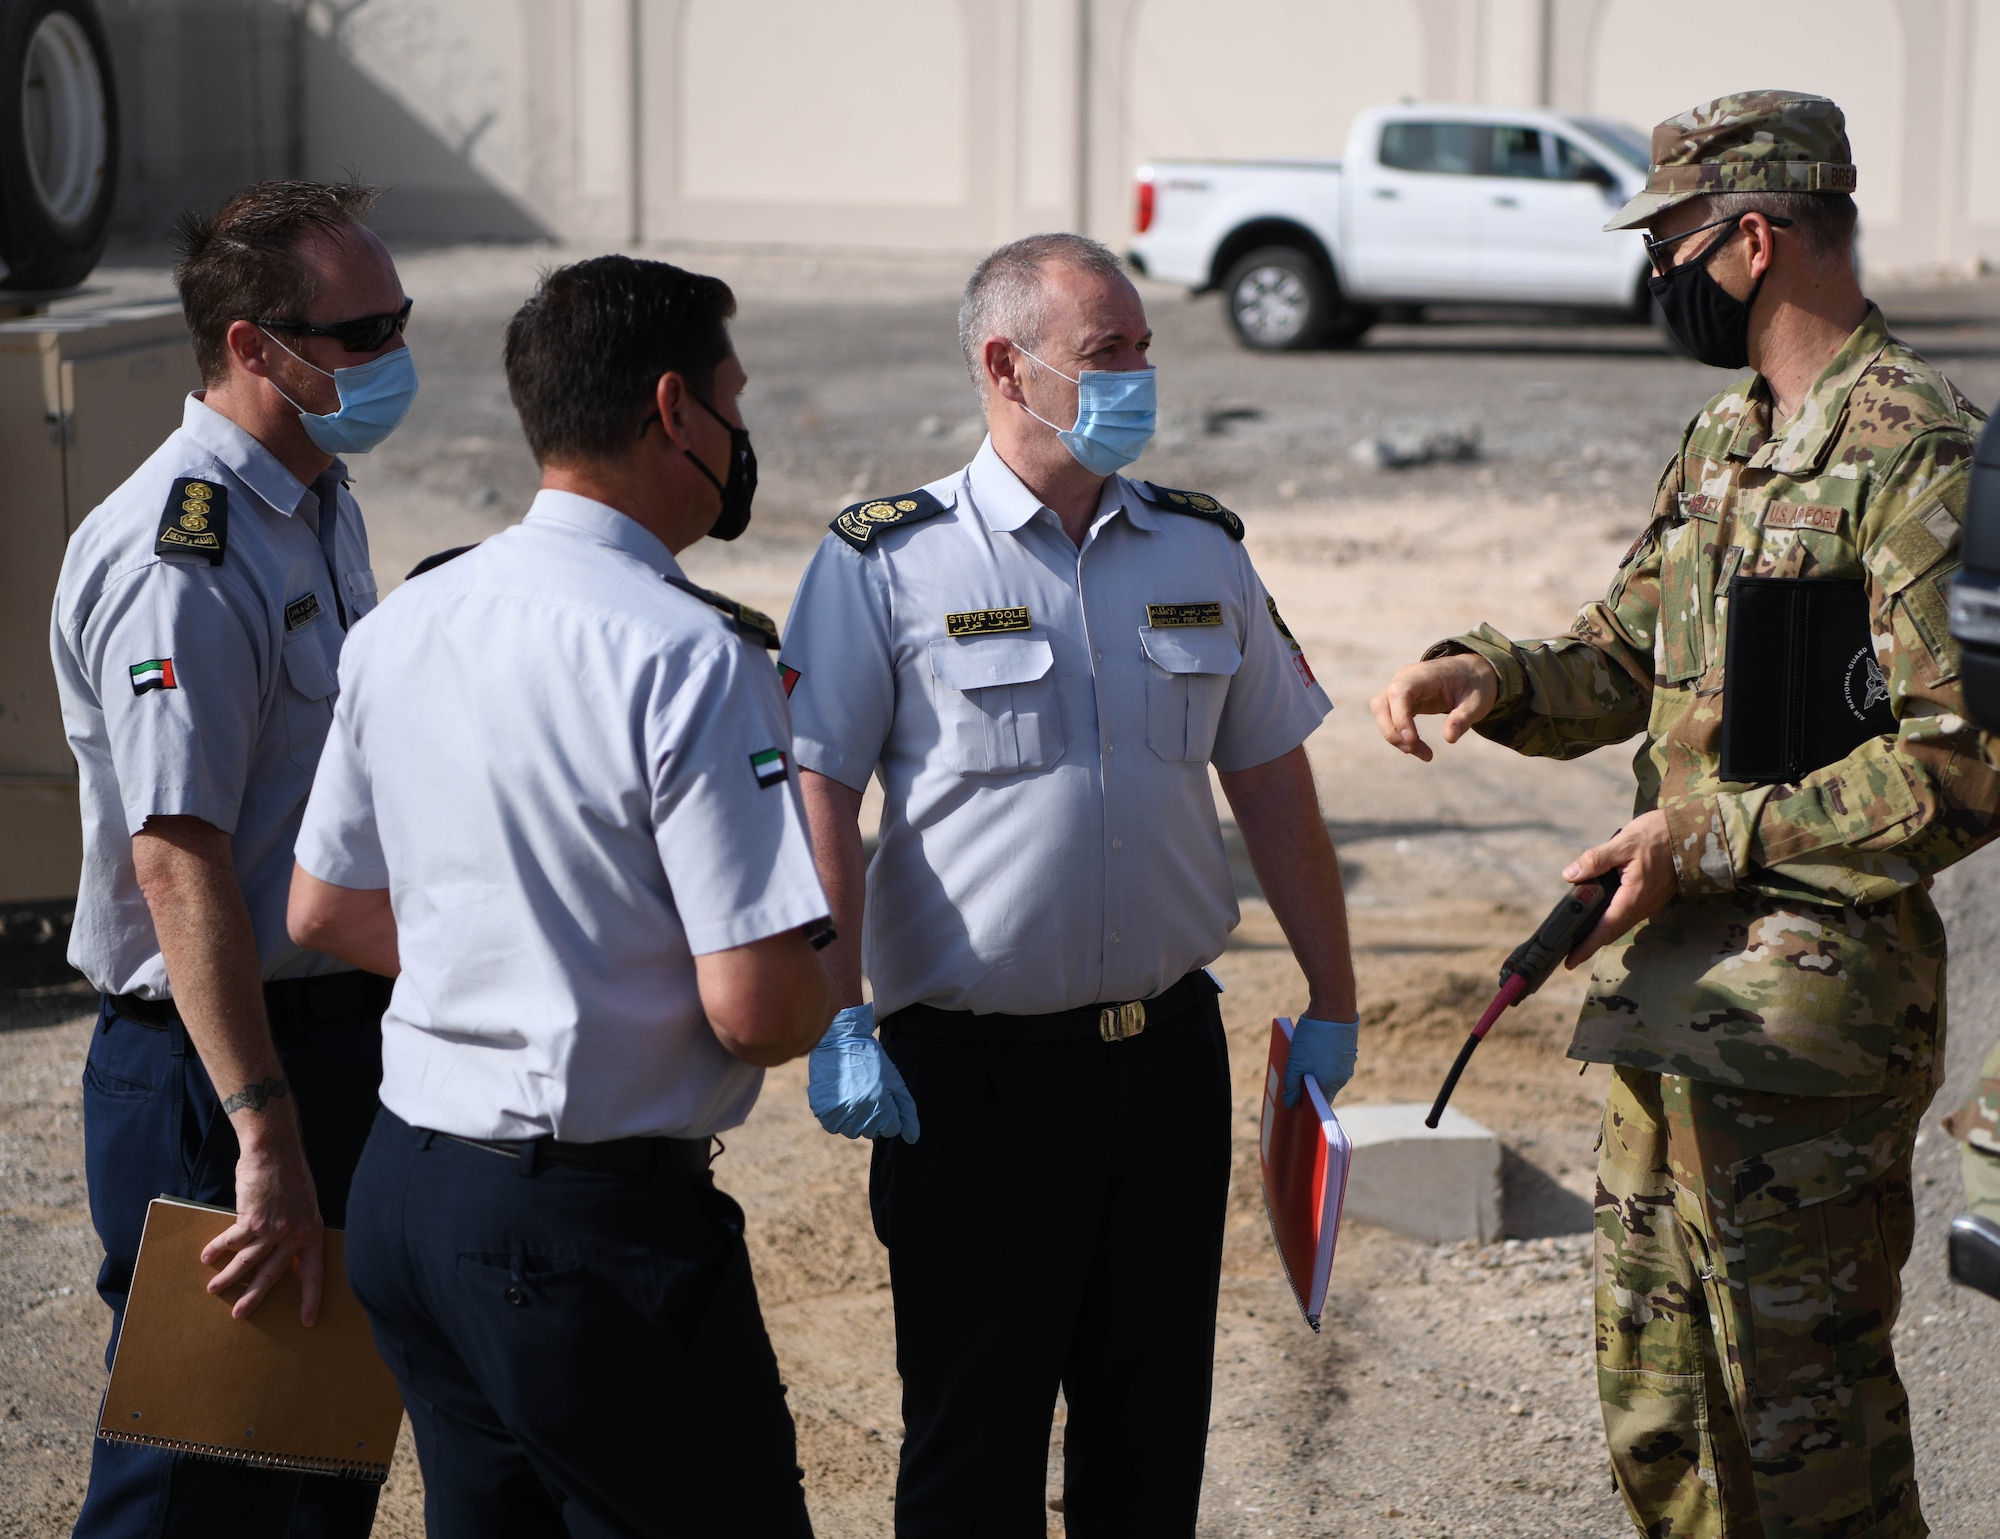 Chief Master Sgt. Christopher Brearley (right), 380th Expeditionary Civil Engineer Squadron fire chief, explains happenings in an accident scene to the United Arab Emirates first responders during the Major Accident Response Exercise (MARE) Thursday, Sept. 3, 2020 at Al Dhafra Air Base, United Arab Emirates.